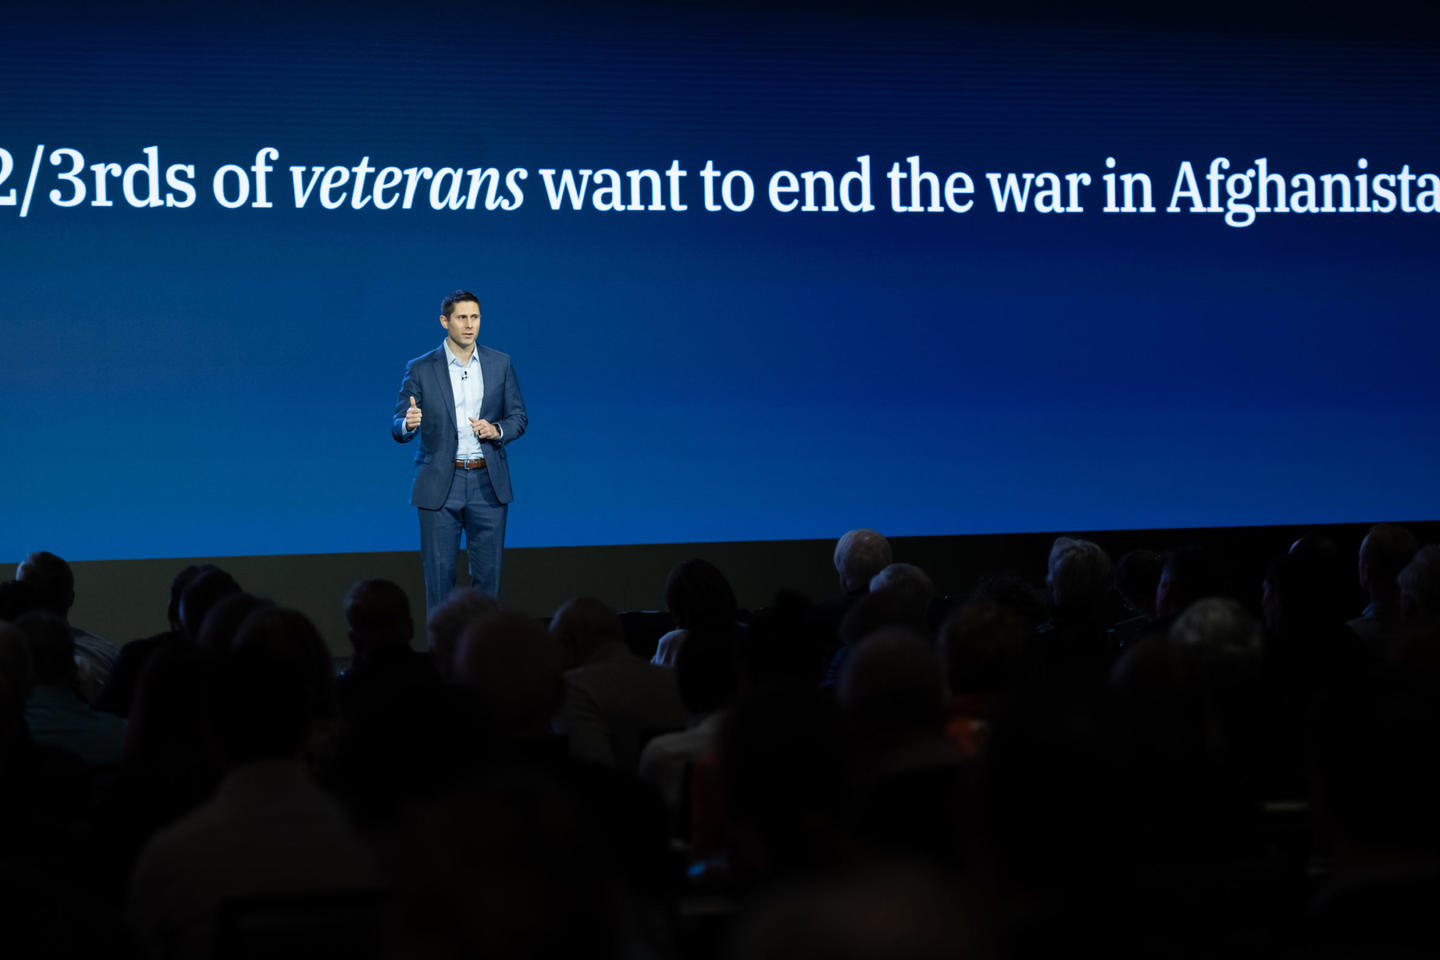 Nate Anderson, executive director of Concerned Veterans for America, on stage